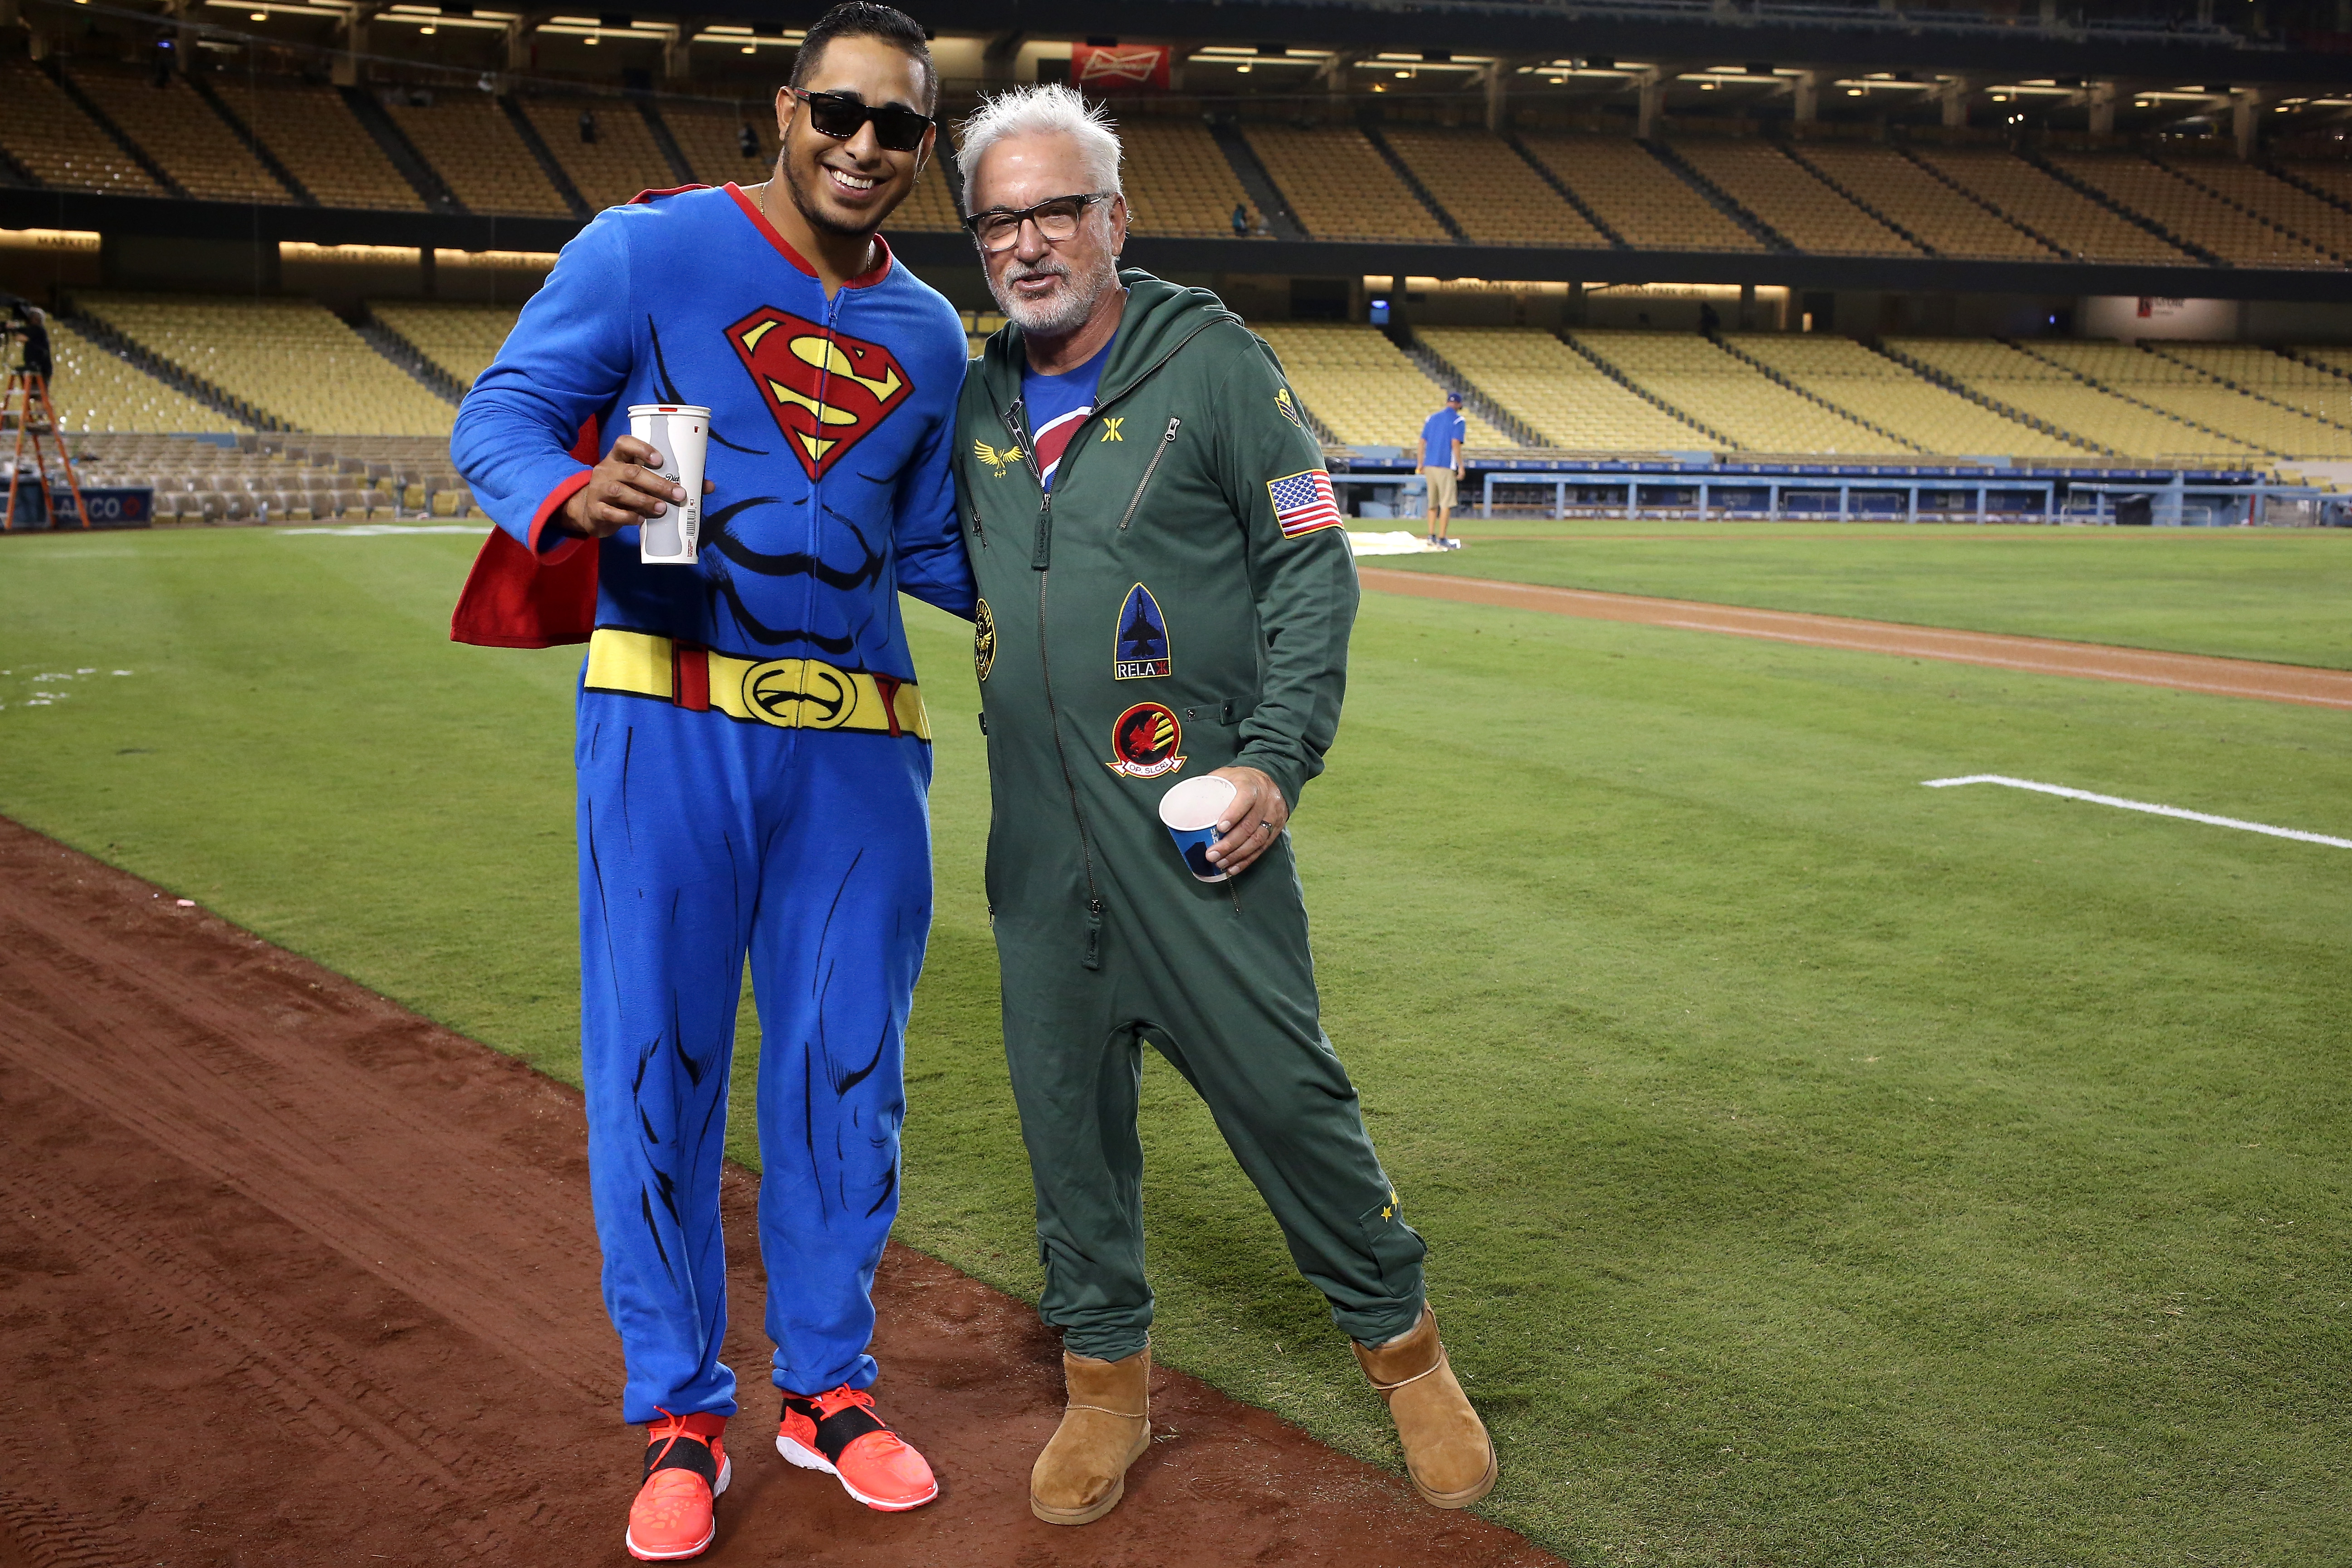 LOS ANGELES, CA - AUGUST 30:  Manager Joe Maddon (R) and pitcher Hector Rondon #56 of the Chicago Cubs pose for a photo as they wear pajamas as part of a team theme trip on their way out of town after the game against the Los Angeles Dodgers at Dodger Stadium on August 30, 2015 in Los Angeles, California.  The Cubs won 2-0.  (Photo by Stephen Dunn/Getty Images) ORG XMIT: 538593555 ORIG FILE ID: 486027048